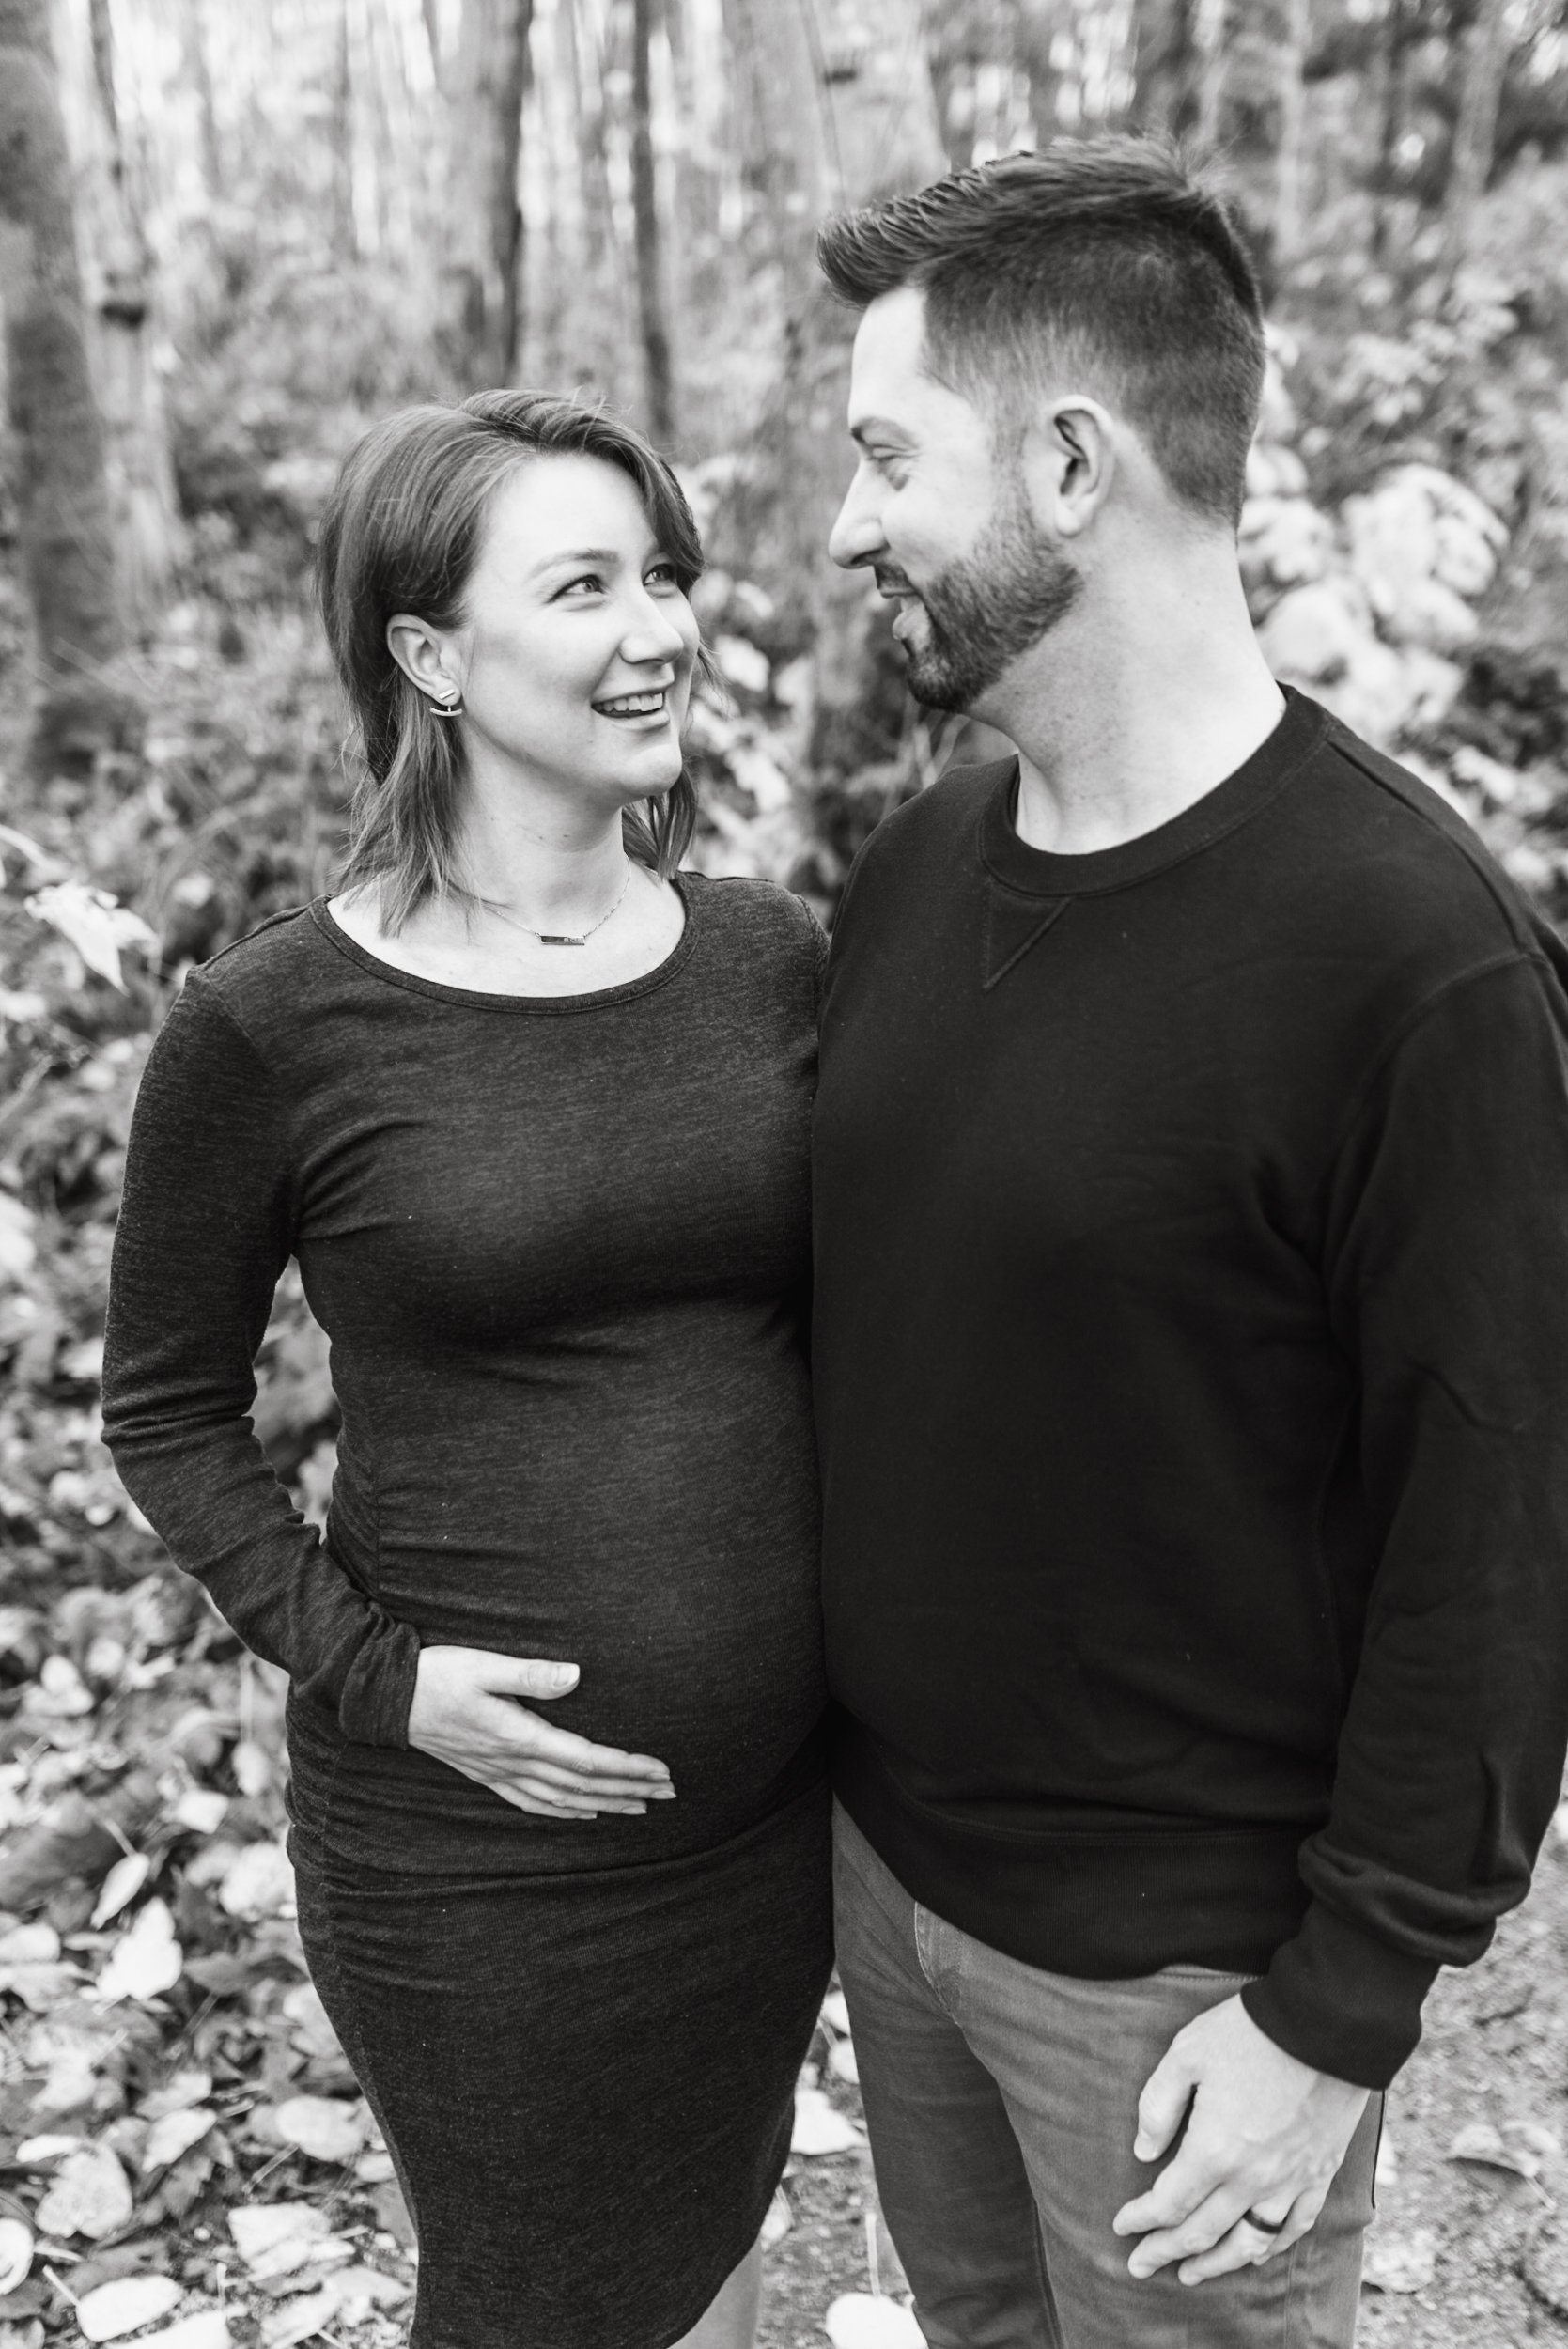 Pregnant woman with husband in forest black and white